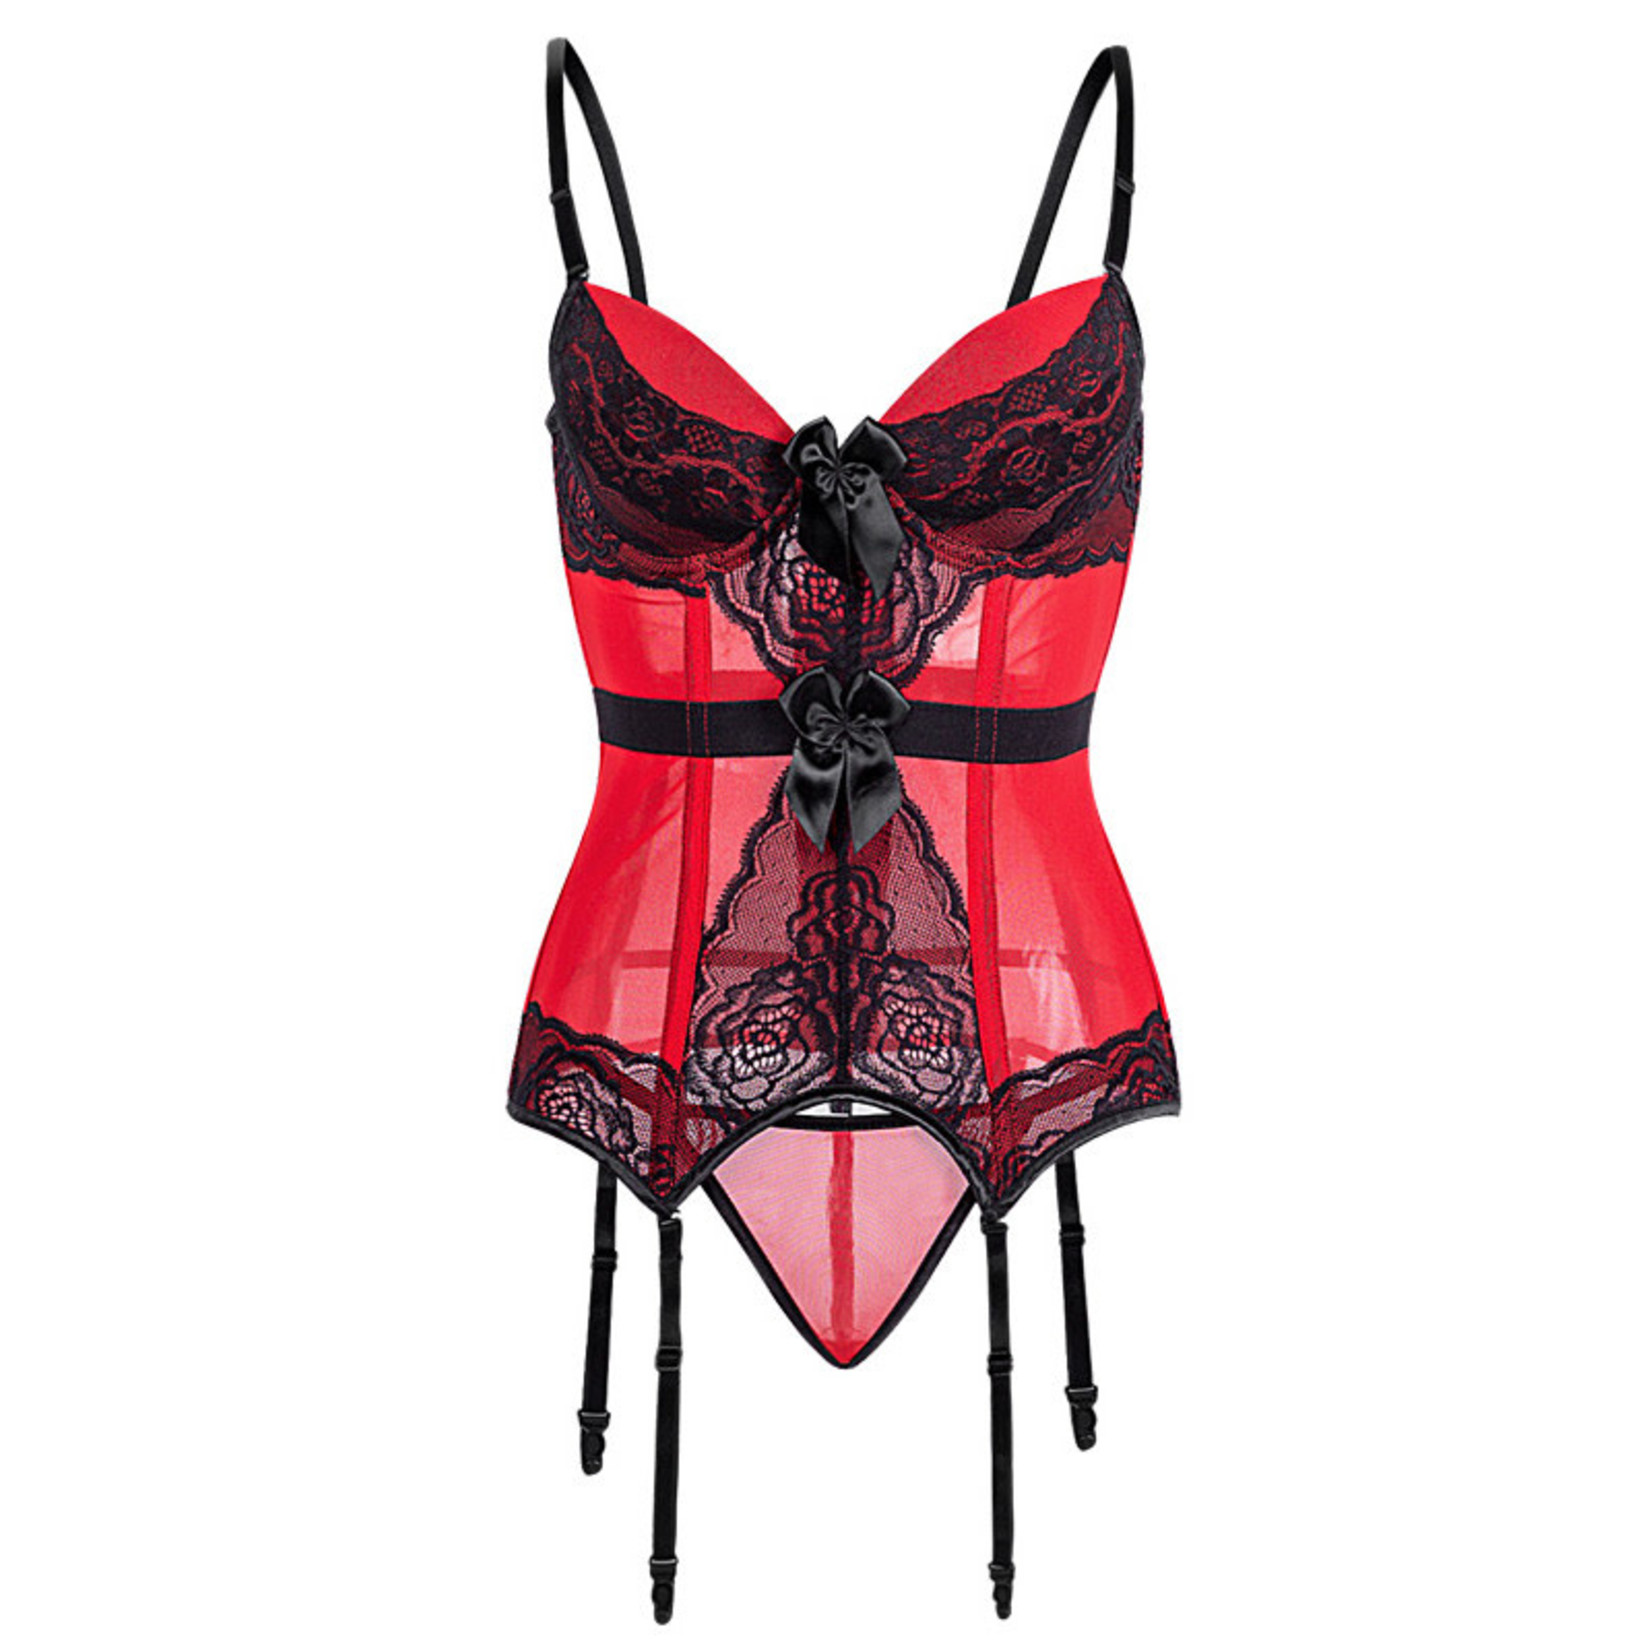 MESH BUSTIER TOP SET RED LARGE